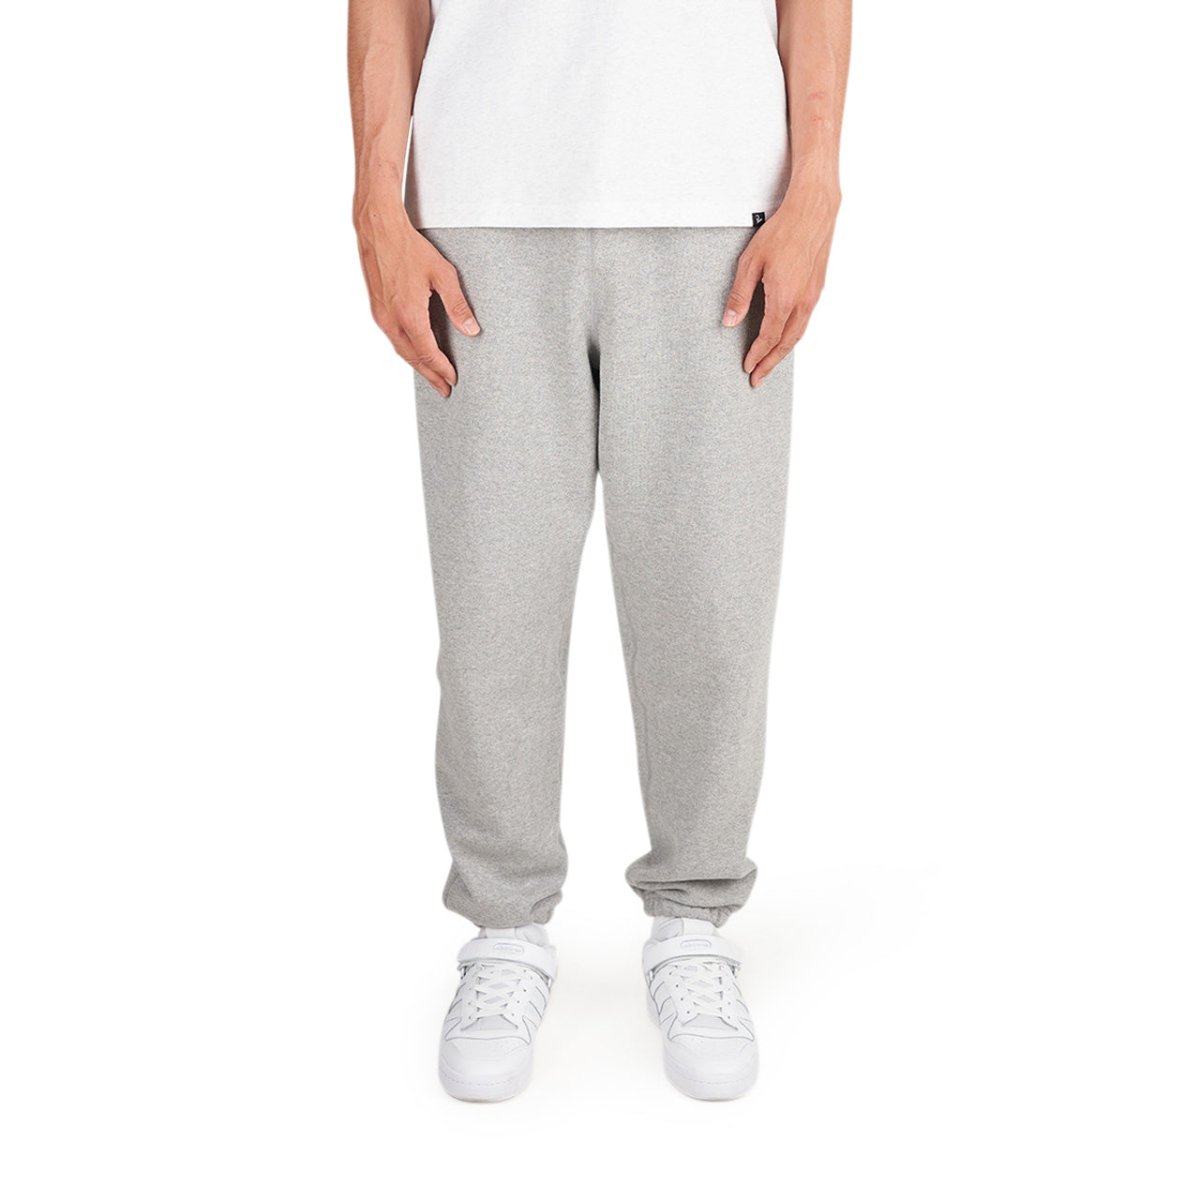 – Made Sweatpant (Grey) in MP21547AG Balance New Allike Core USA Store